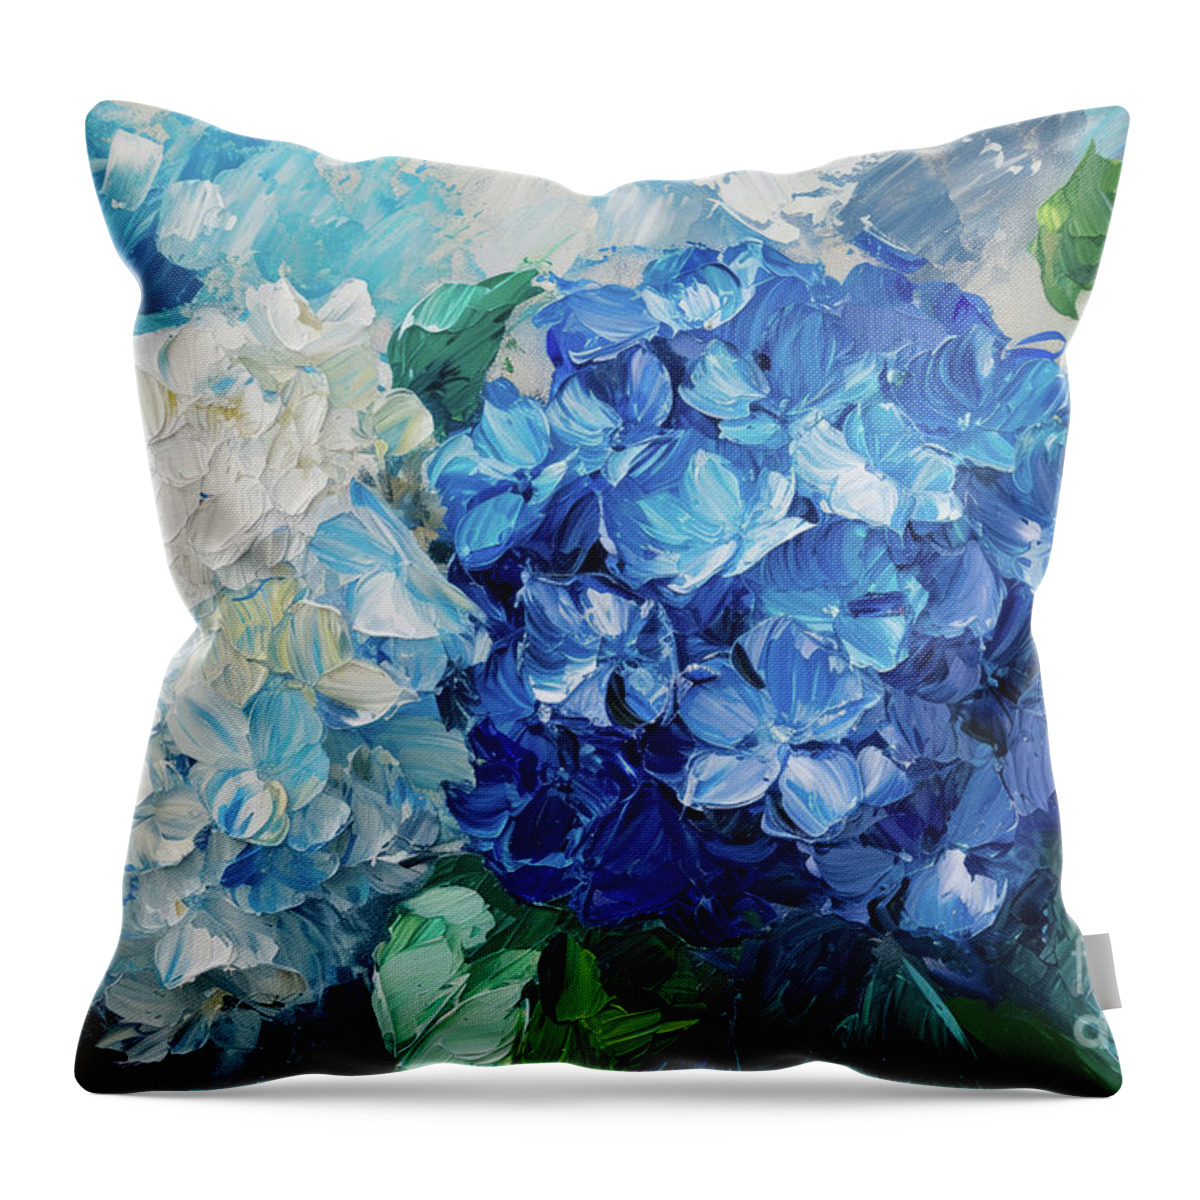 Hydrangea Flowers Throw Pillow featuring the painting Endless Summer Hydrangea Flowers by Tina LeCour